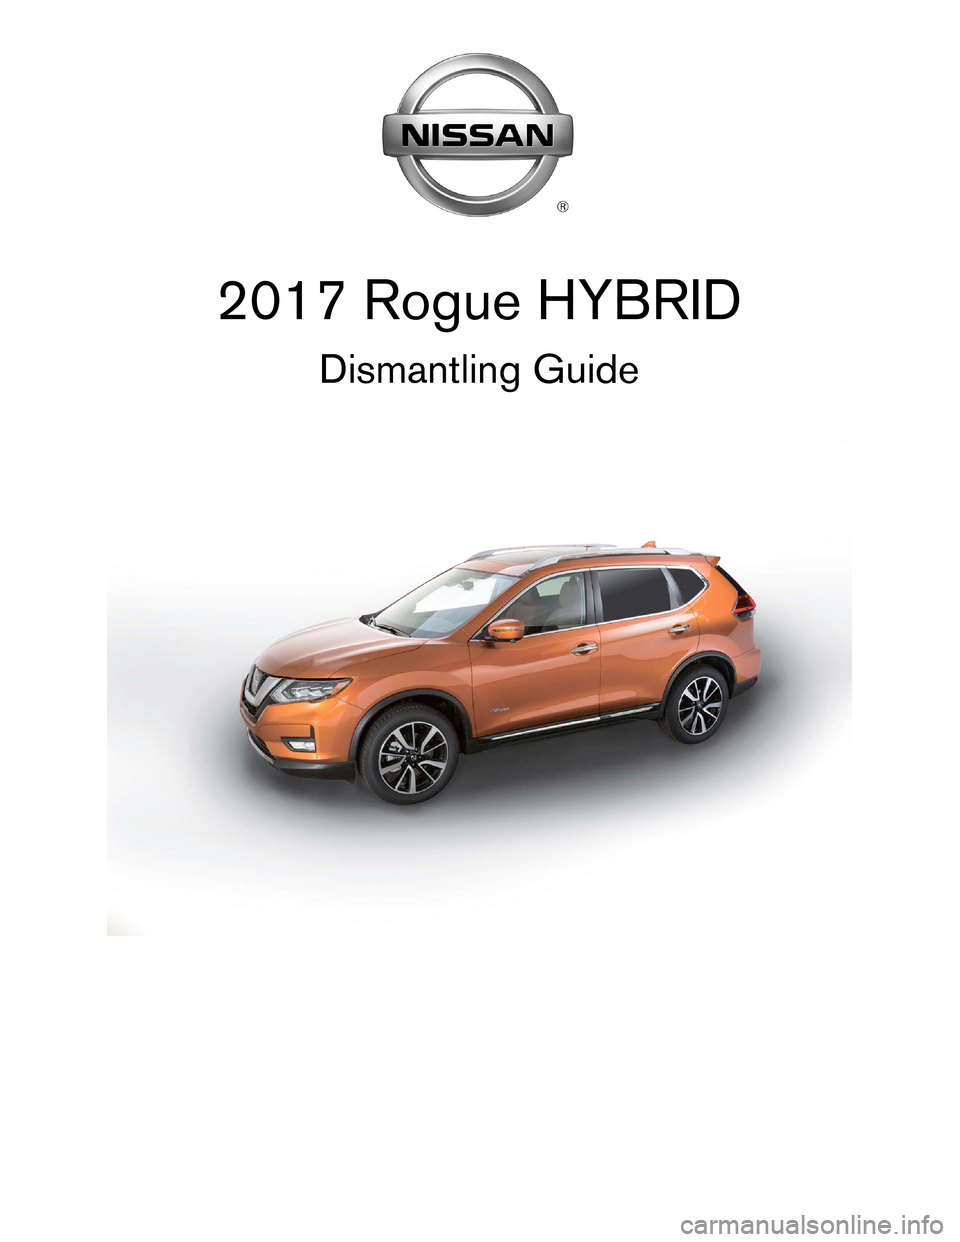 NISSAN ROGUE HYBRID 2017 2.G Dismantling Guide 2017 Rogue HYBRID
Dismantling Guide   